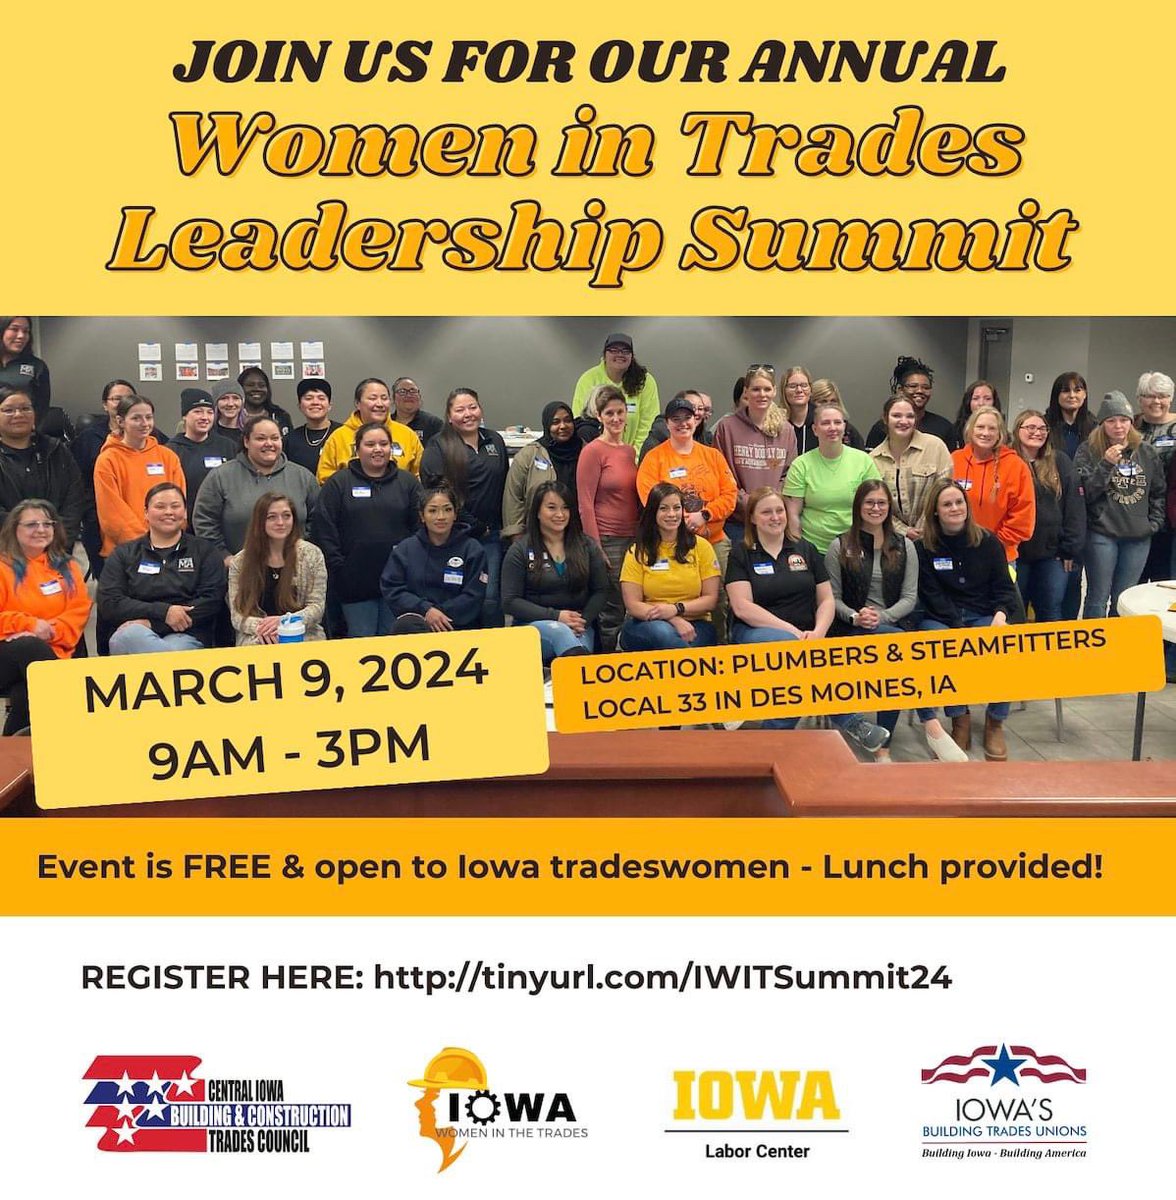 Calling all Iowa tradeswomen! WE CAN'T WAIT TO SEE YOU! We have great food, prizes, speakers and sisters this year! It is not too late to sign up! Register here: tinyurl.com/IWITSummit24